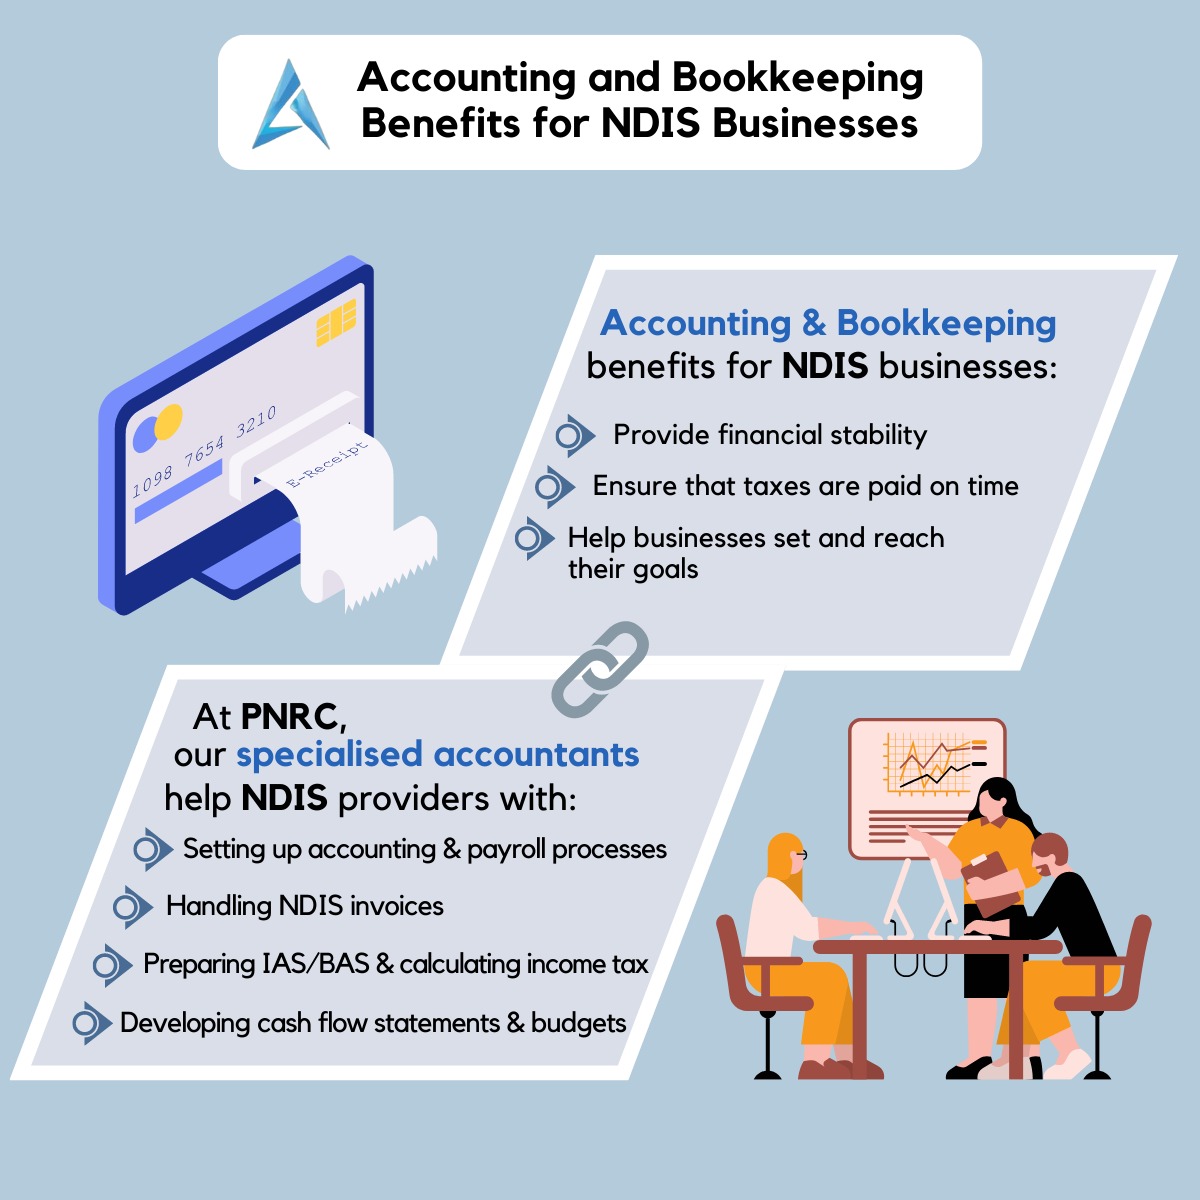 Accounting and Bookkeeping Benefits for NDIS businesses